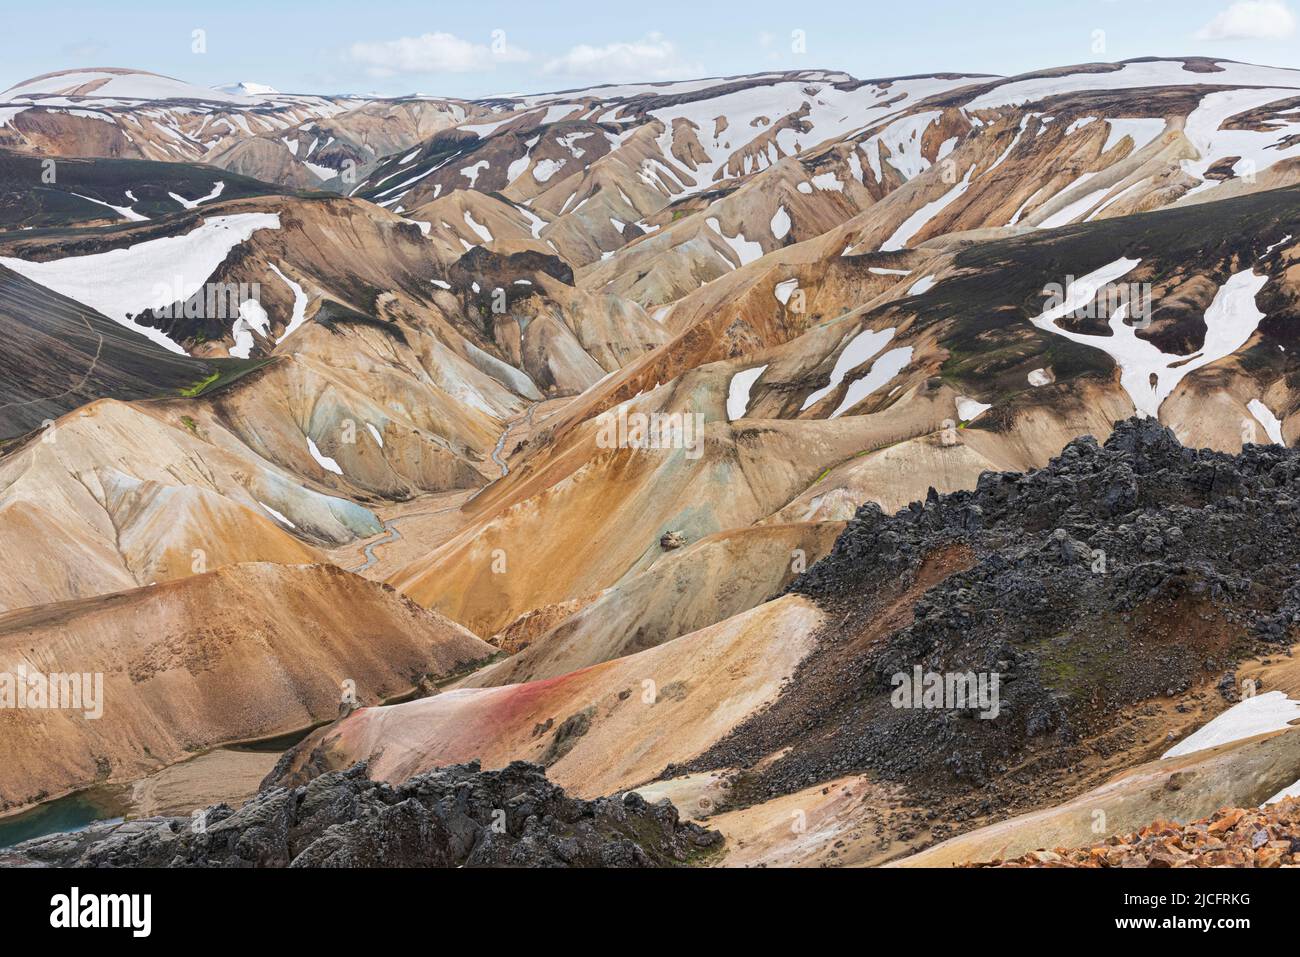 Laugavegur hiking trail is the most famous multi-day trekking tour in Iceland. Landscape photo from the area around Landmannalaugar, starting point of the long-distance hiking trail in the highlands of Iceland. Stock Photo